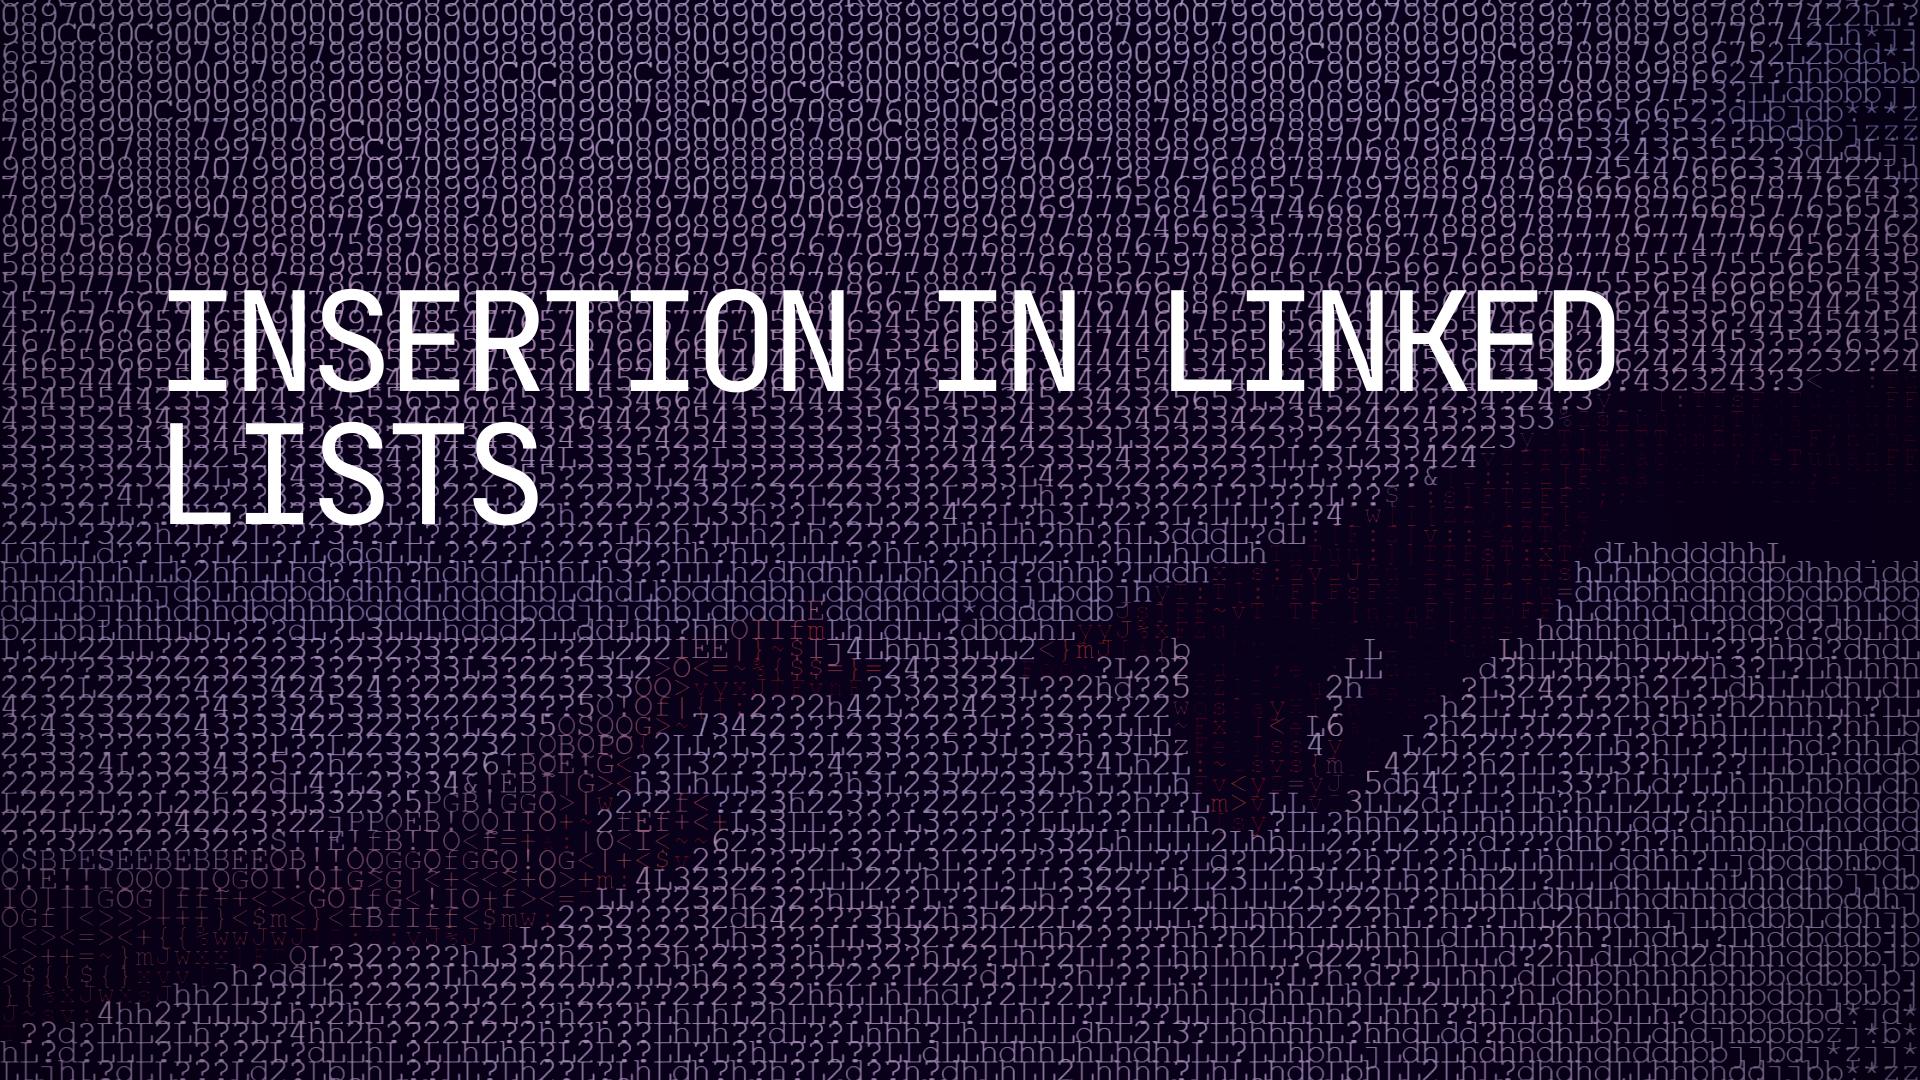 Insertion Operations in a Linked List